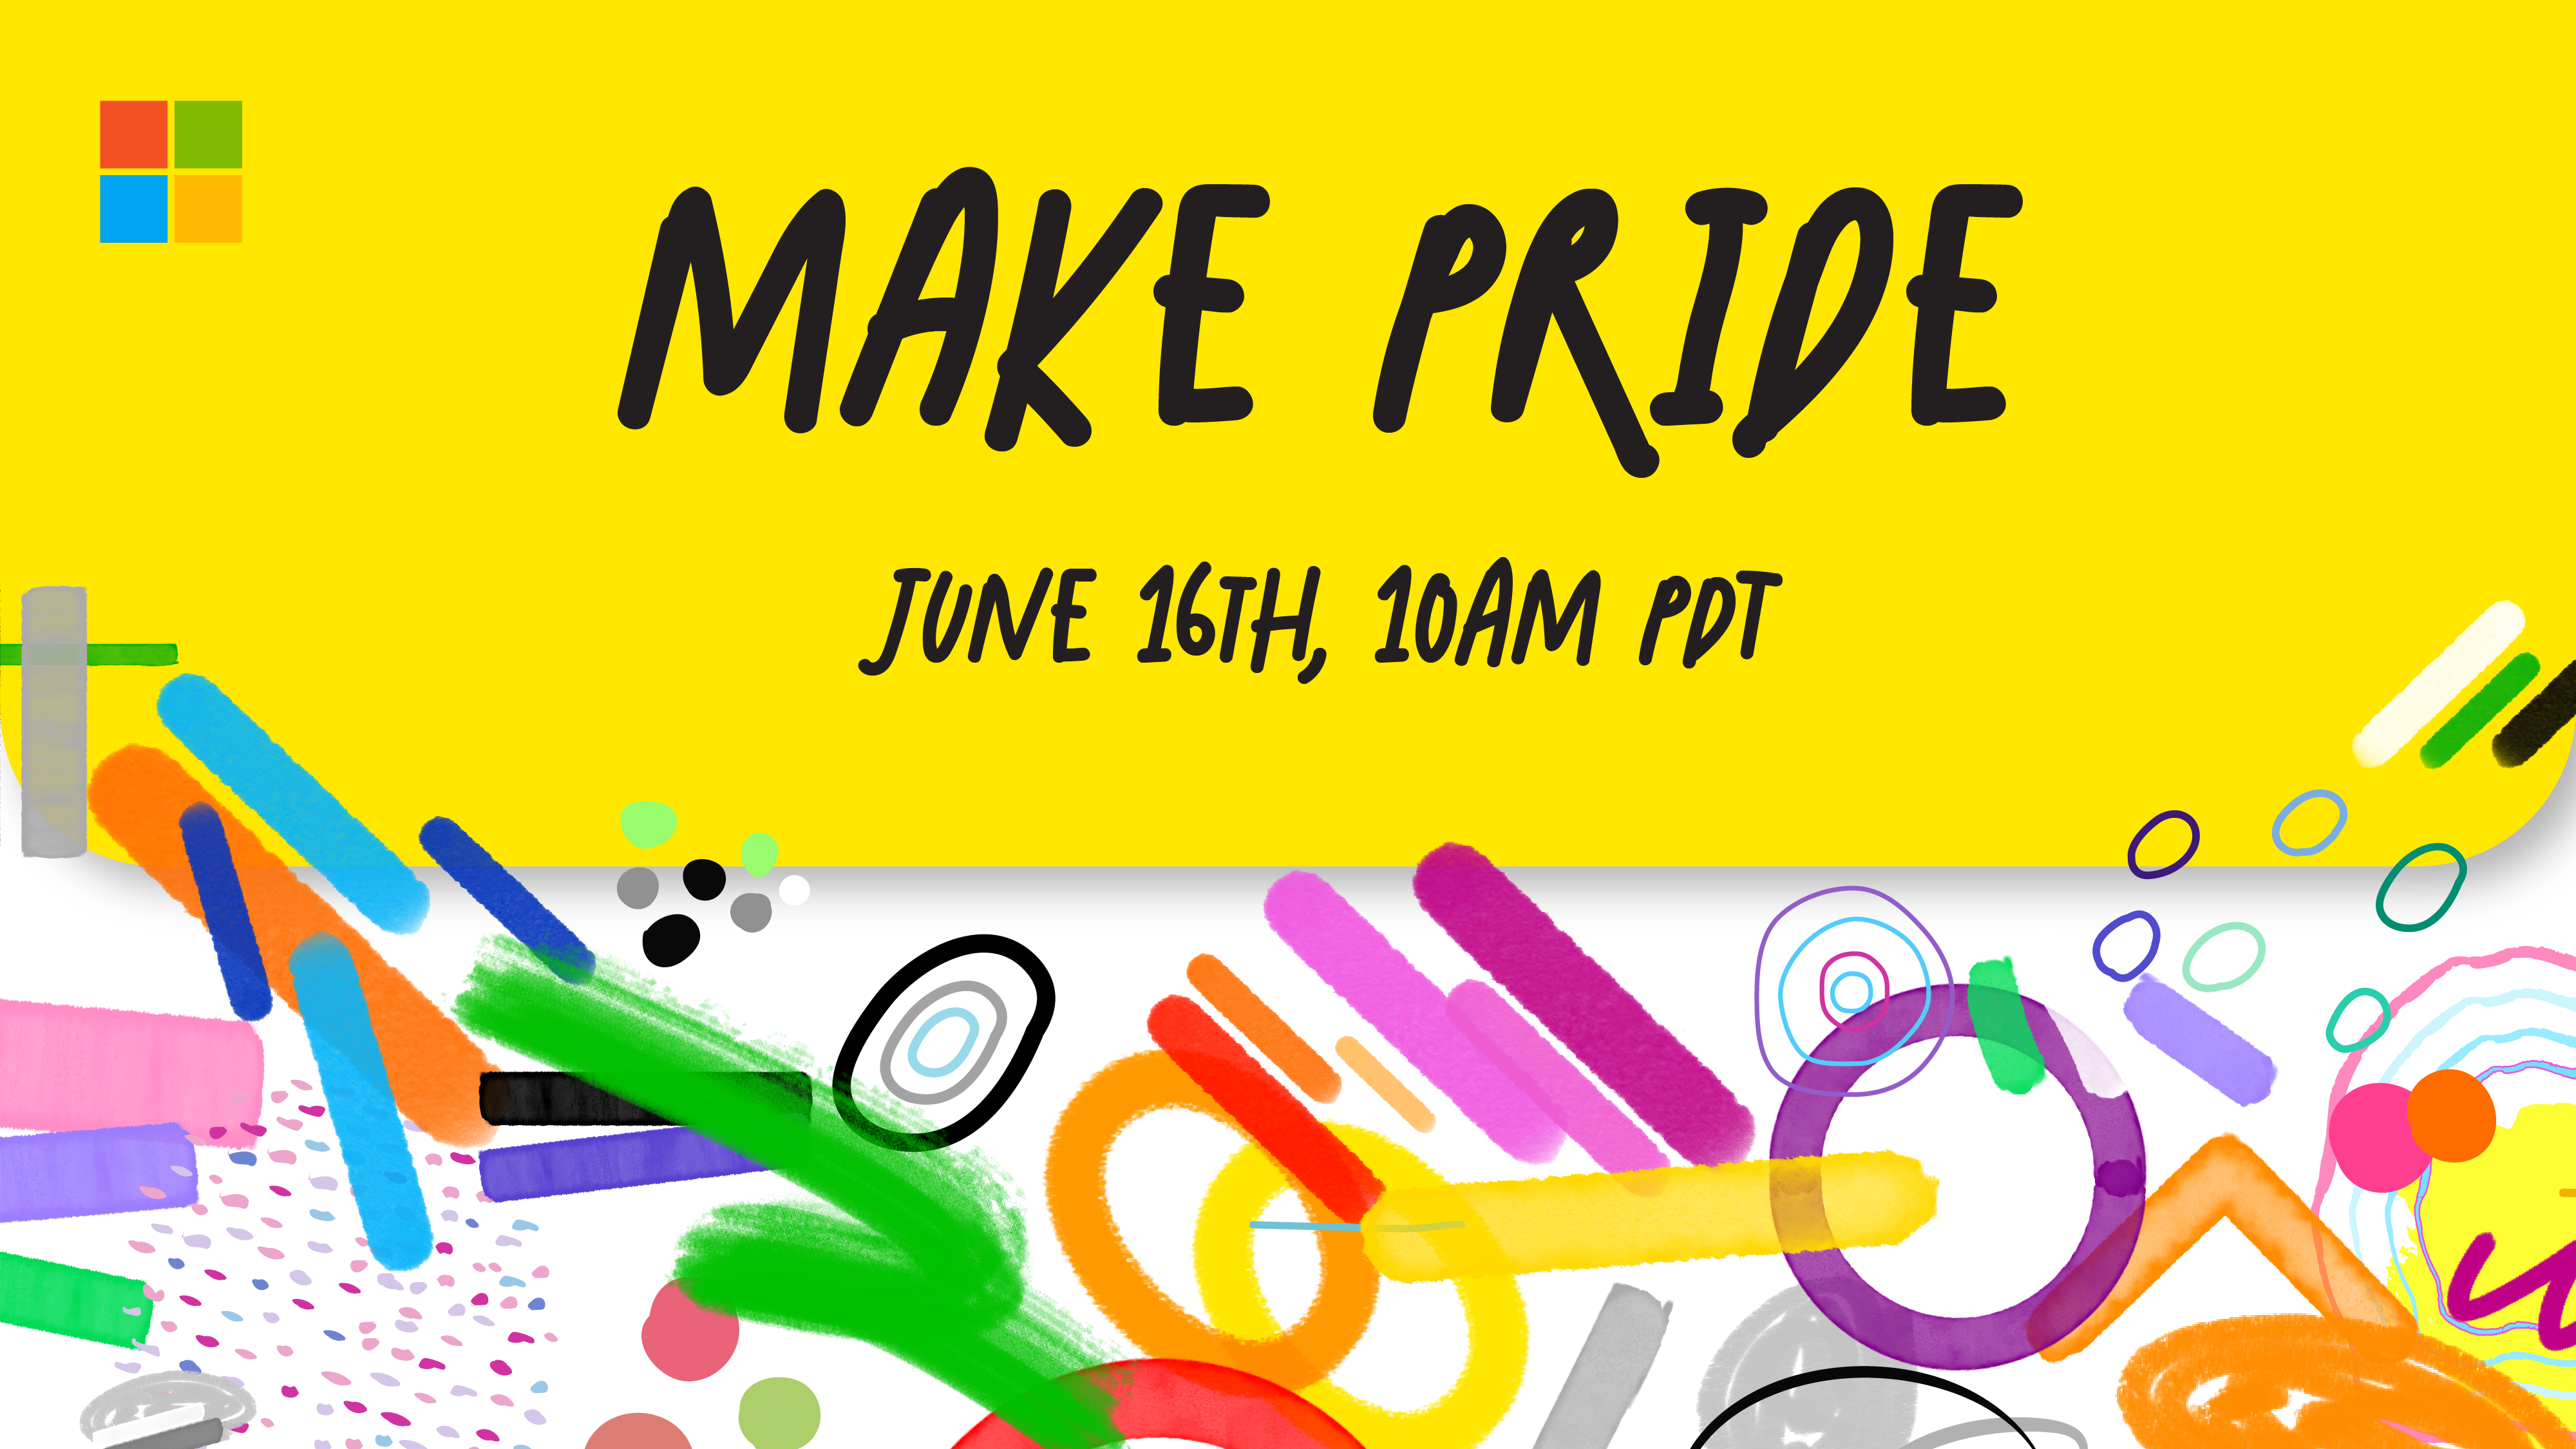 Event banner designed with brush strokes representing LGBTQIA+ communities and a Microsoft symbol. Text reads “Make Pride June 16th, 10am PST”